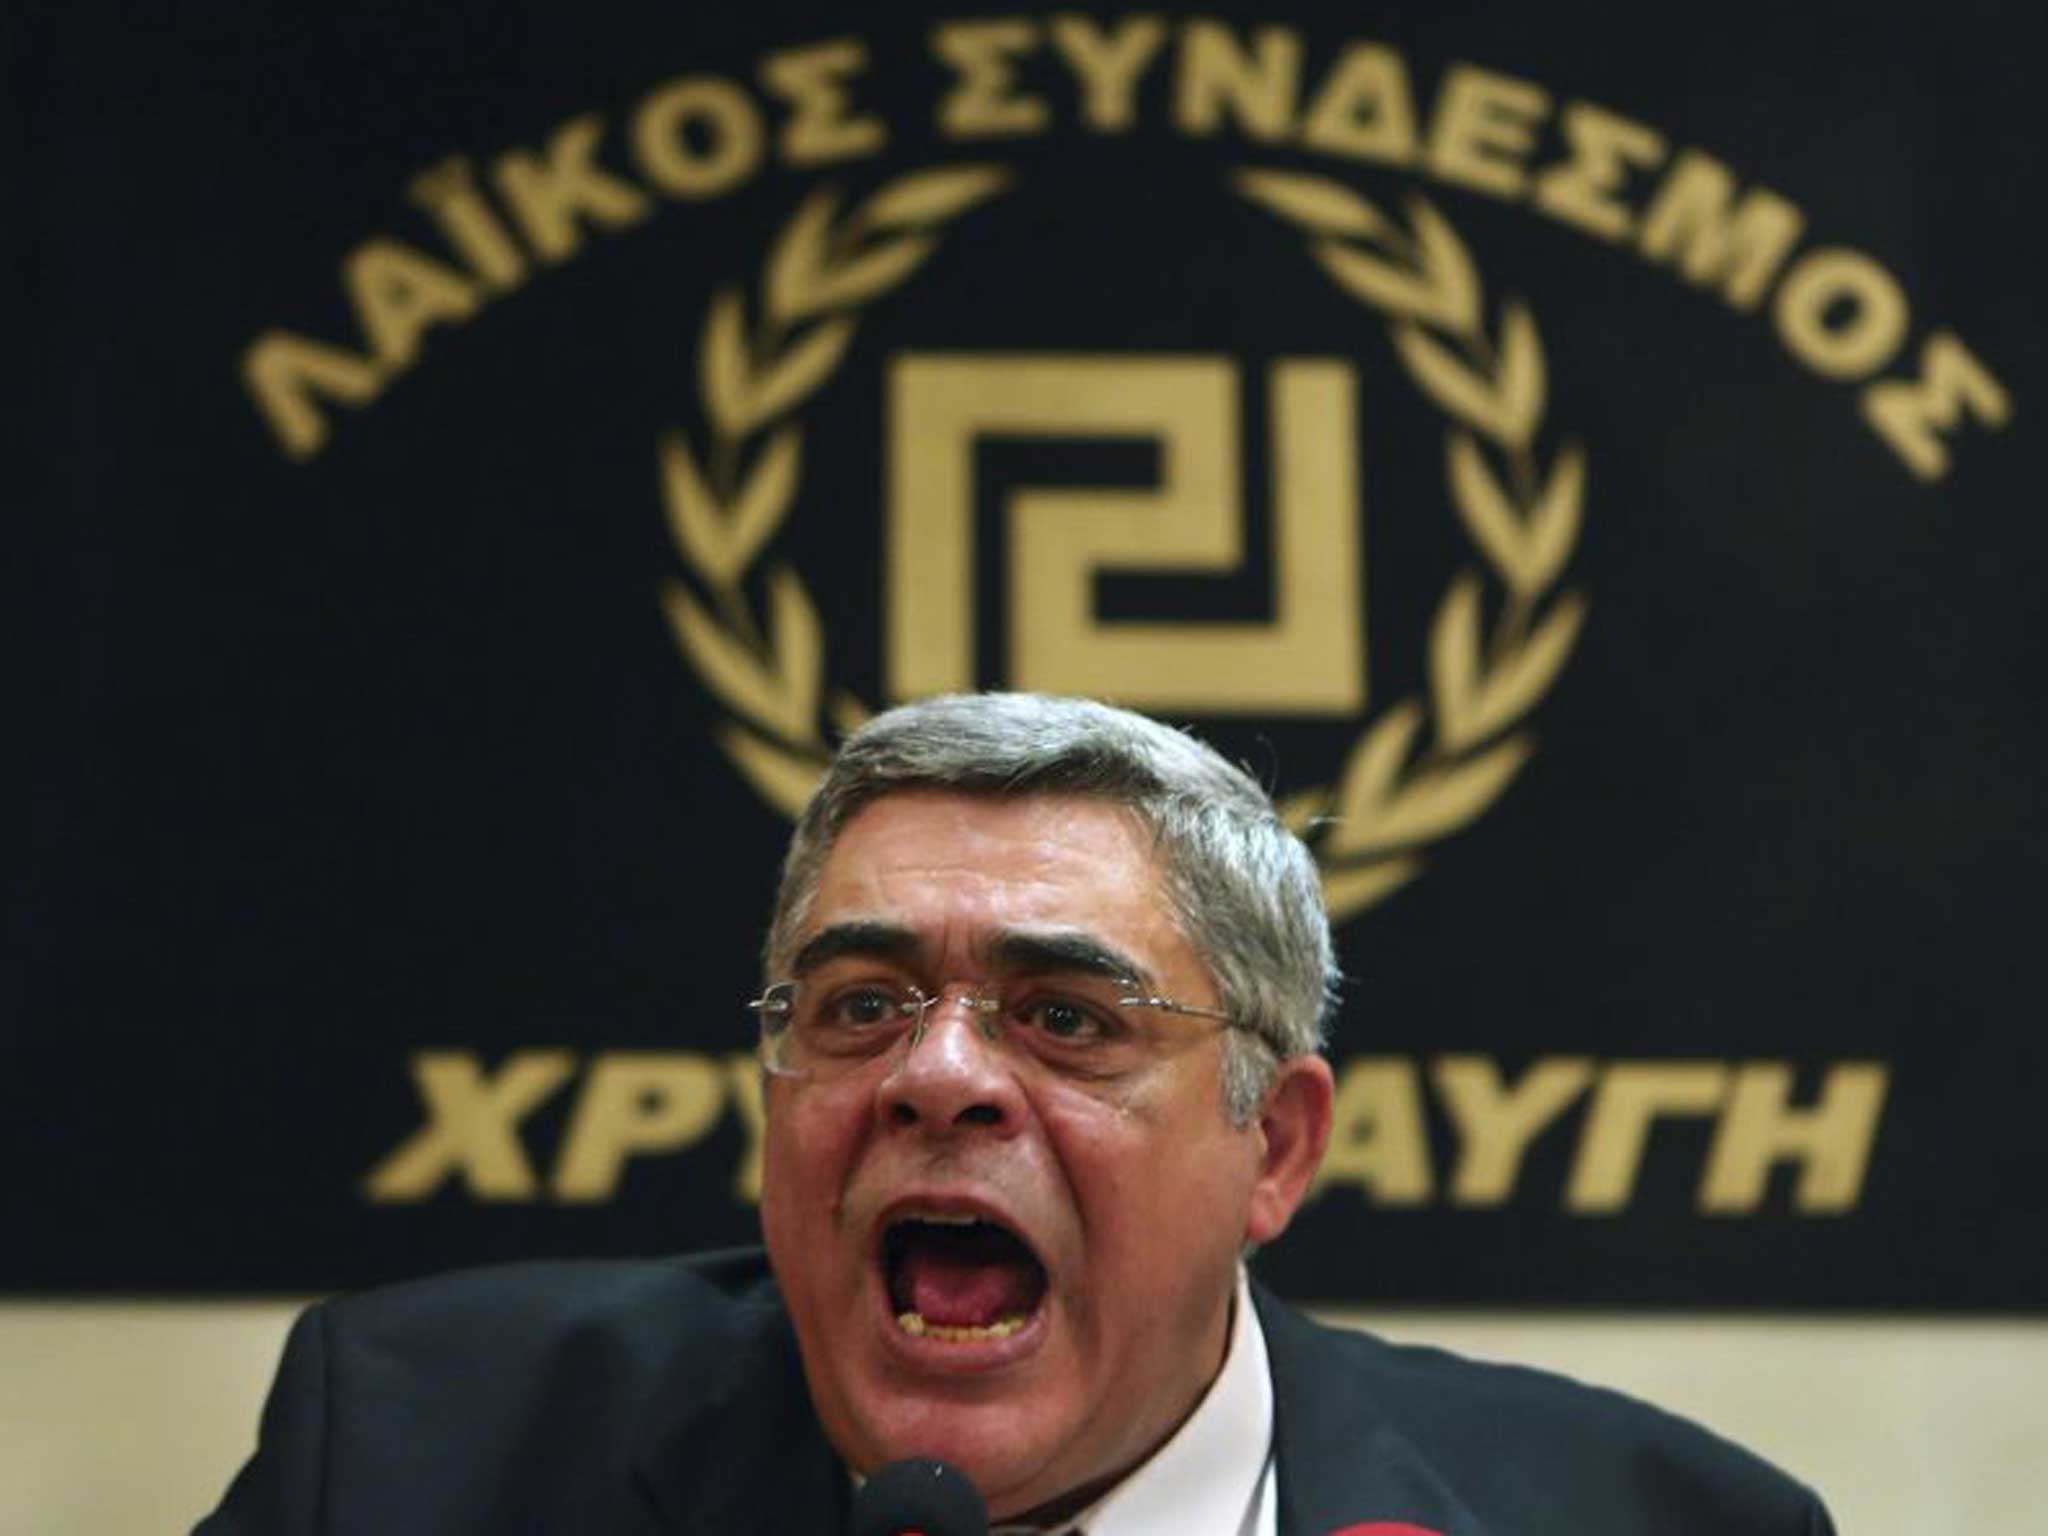 Golden Dawn - Greece's third most popular party, according to opinion polls - has denied any links to the rapper's killing and Mihaloliakos has warned it may pull its 18 lawmakers from parliament if the crackdown does not stop